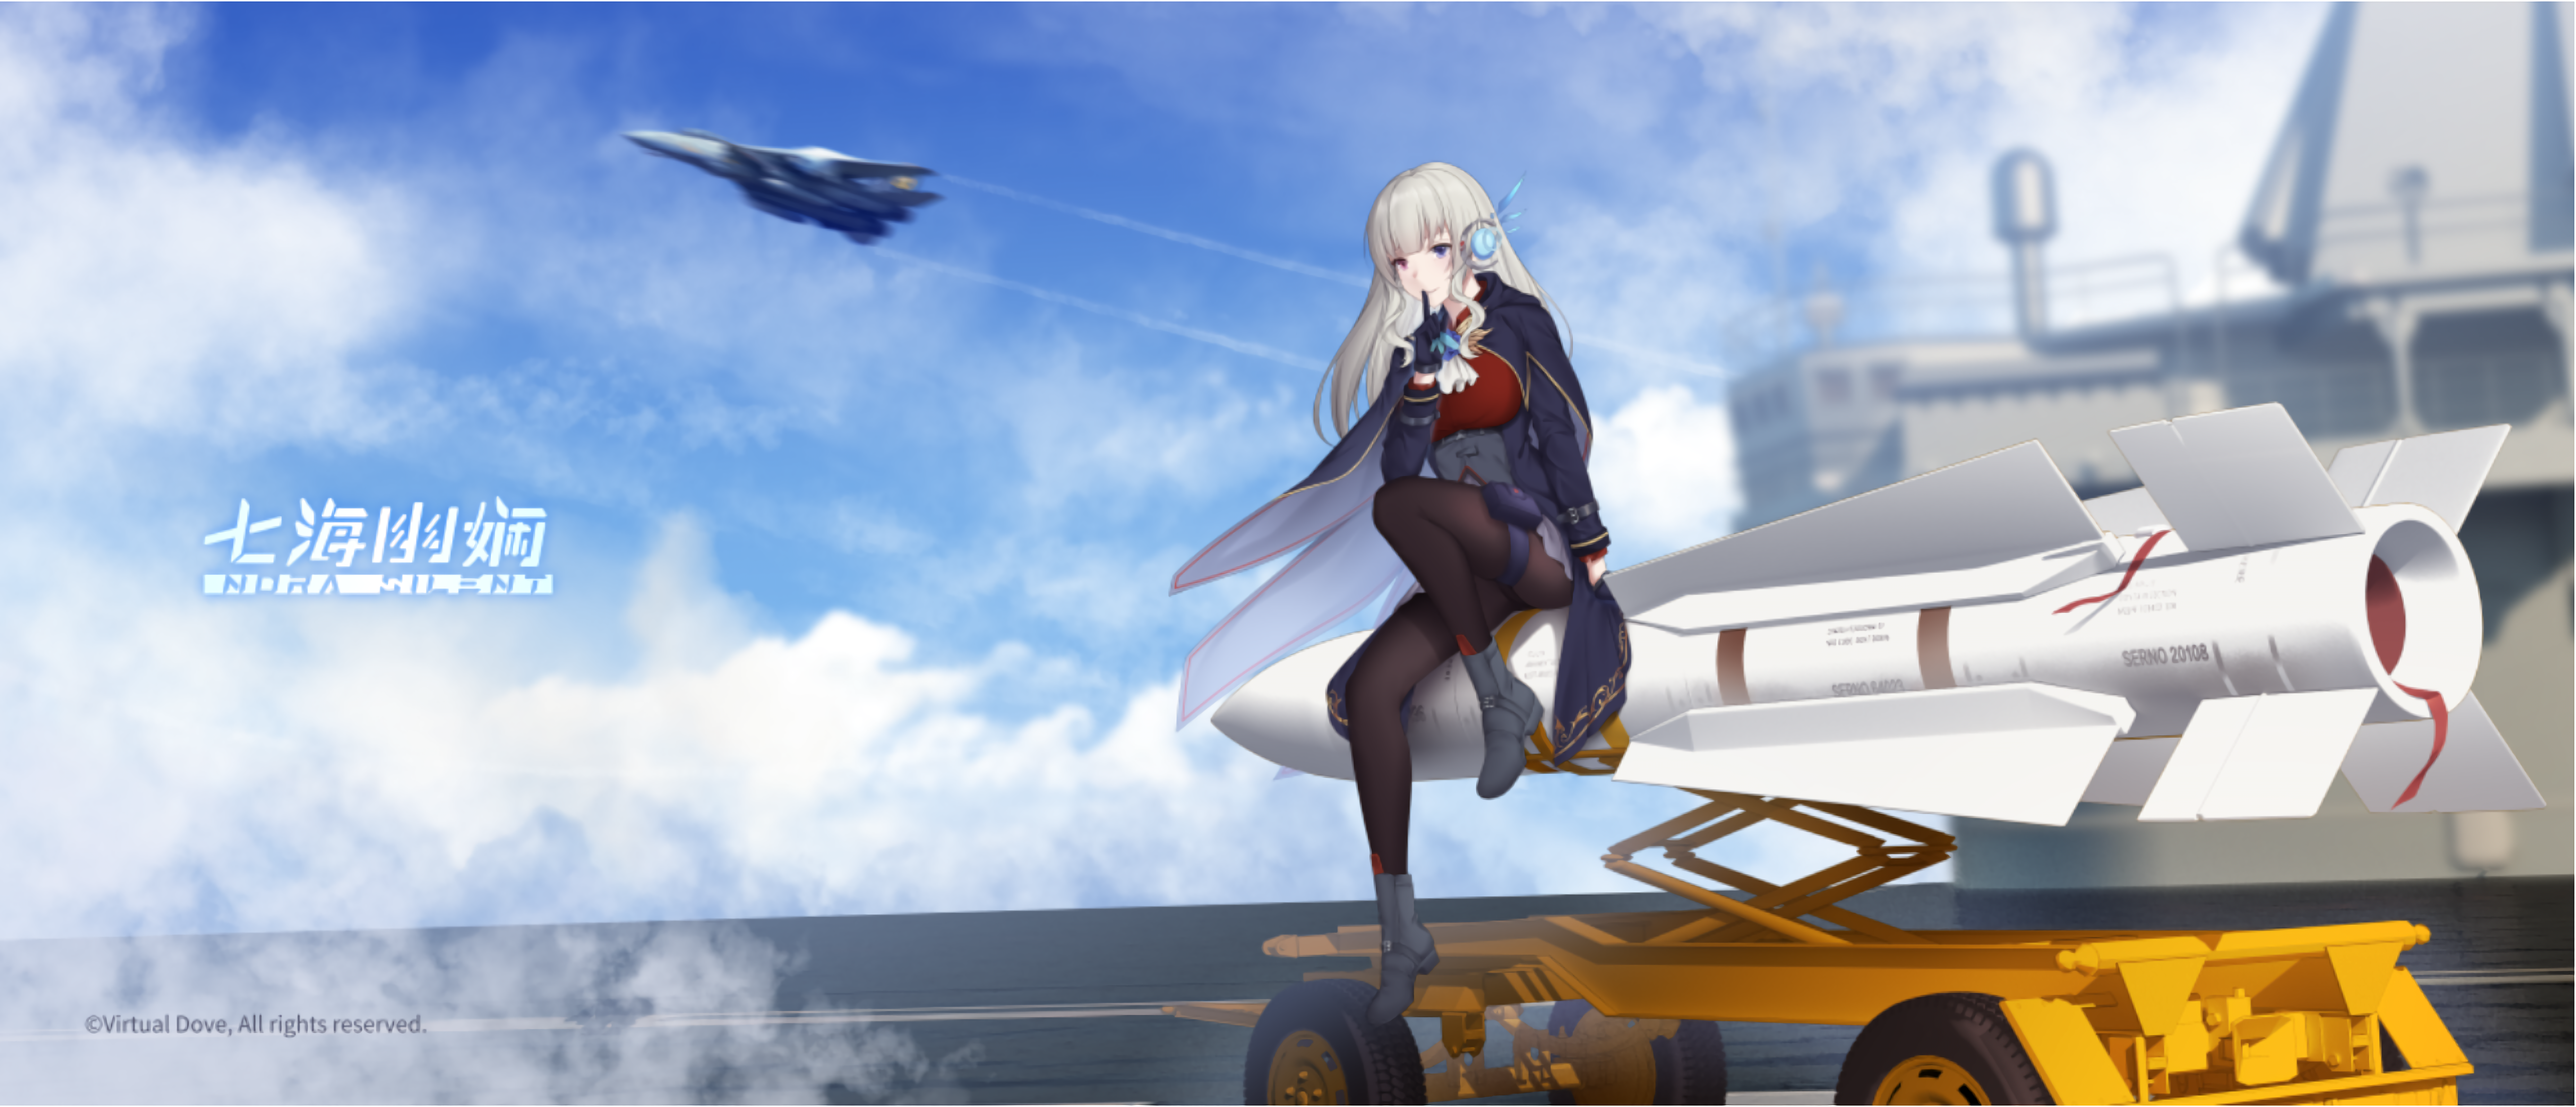 New Aircraft FF-3S Saber Fish news - Anime Fans of modDB - IndieDB